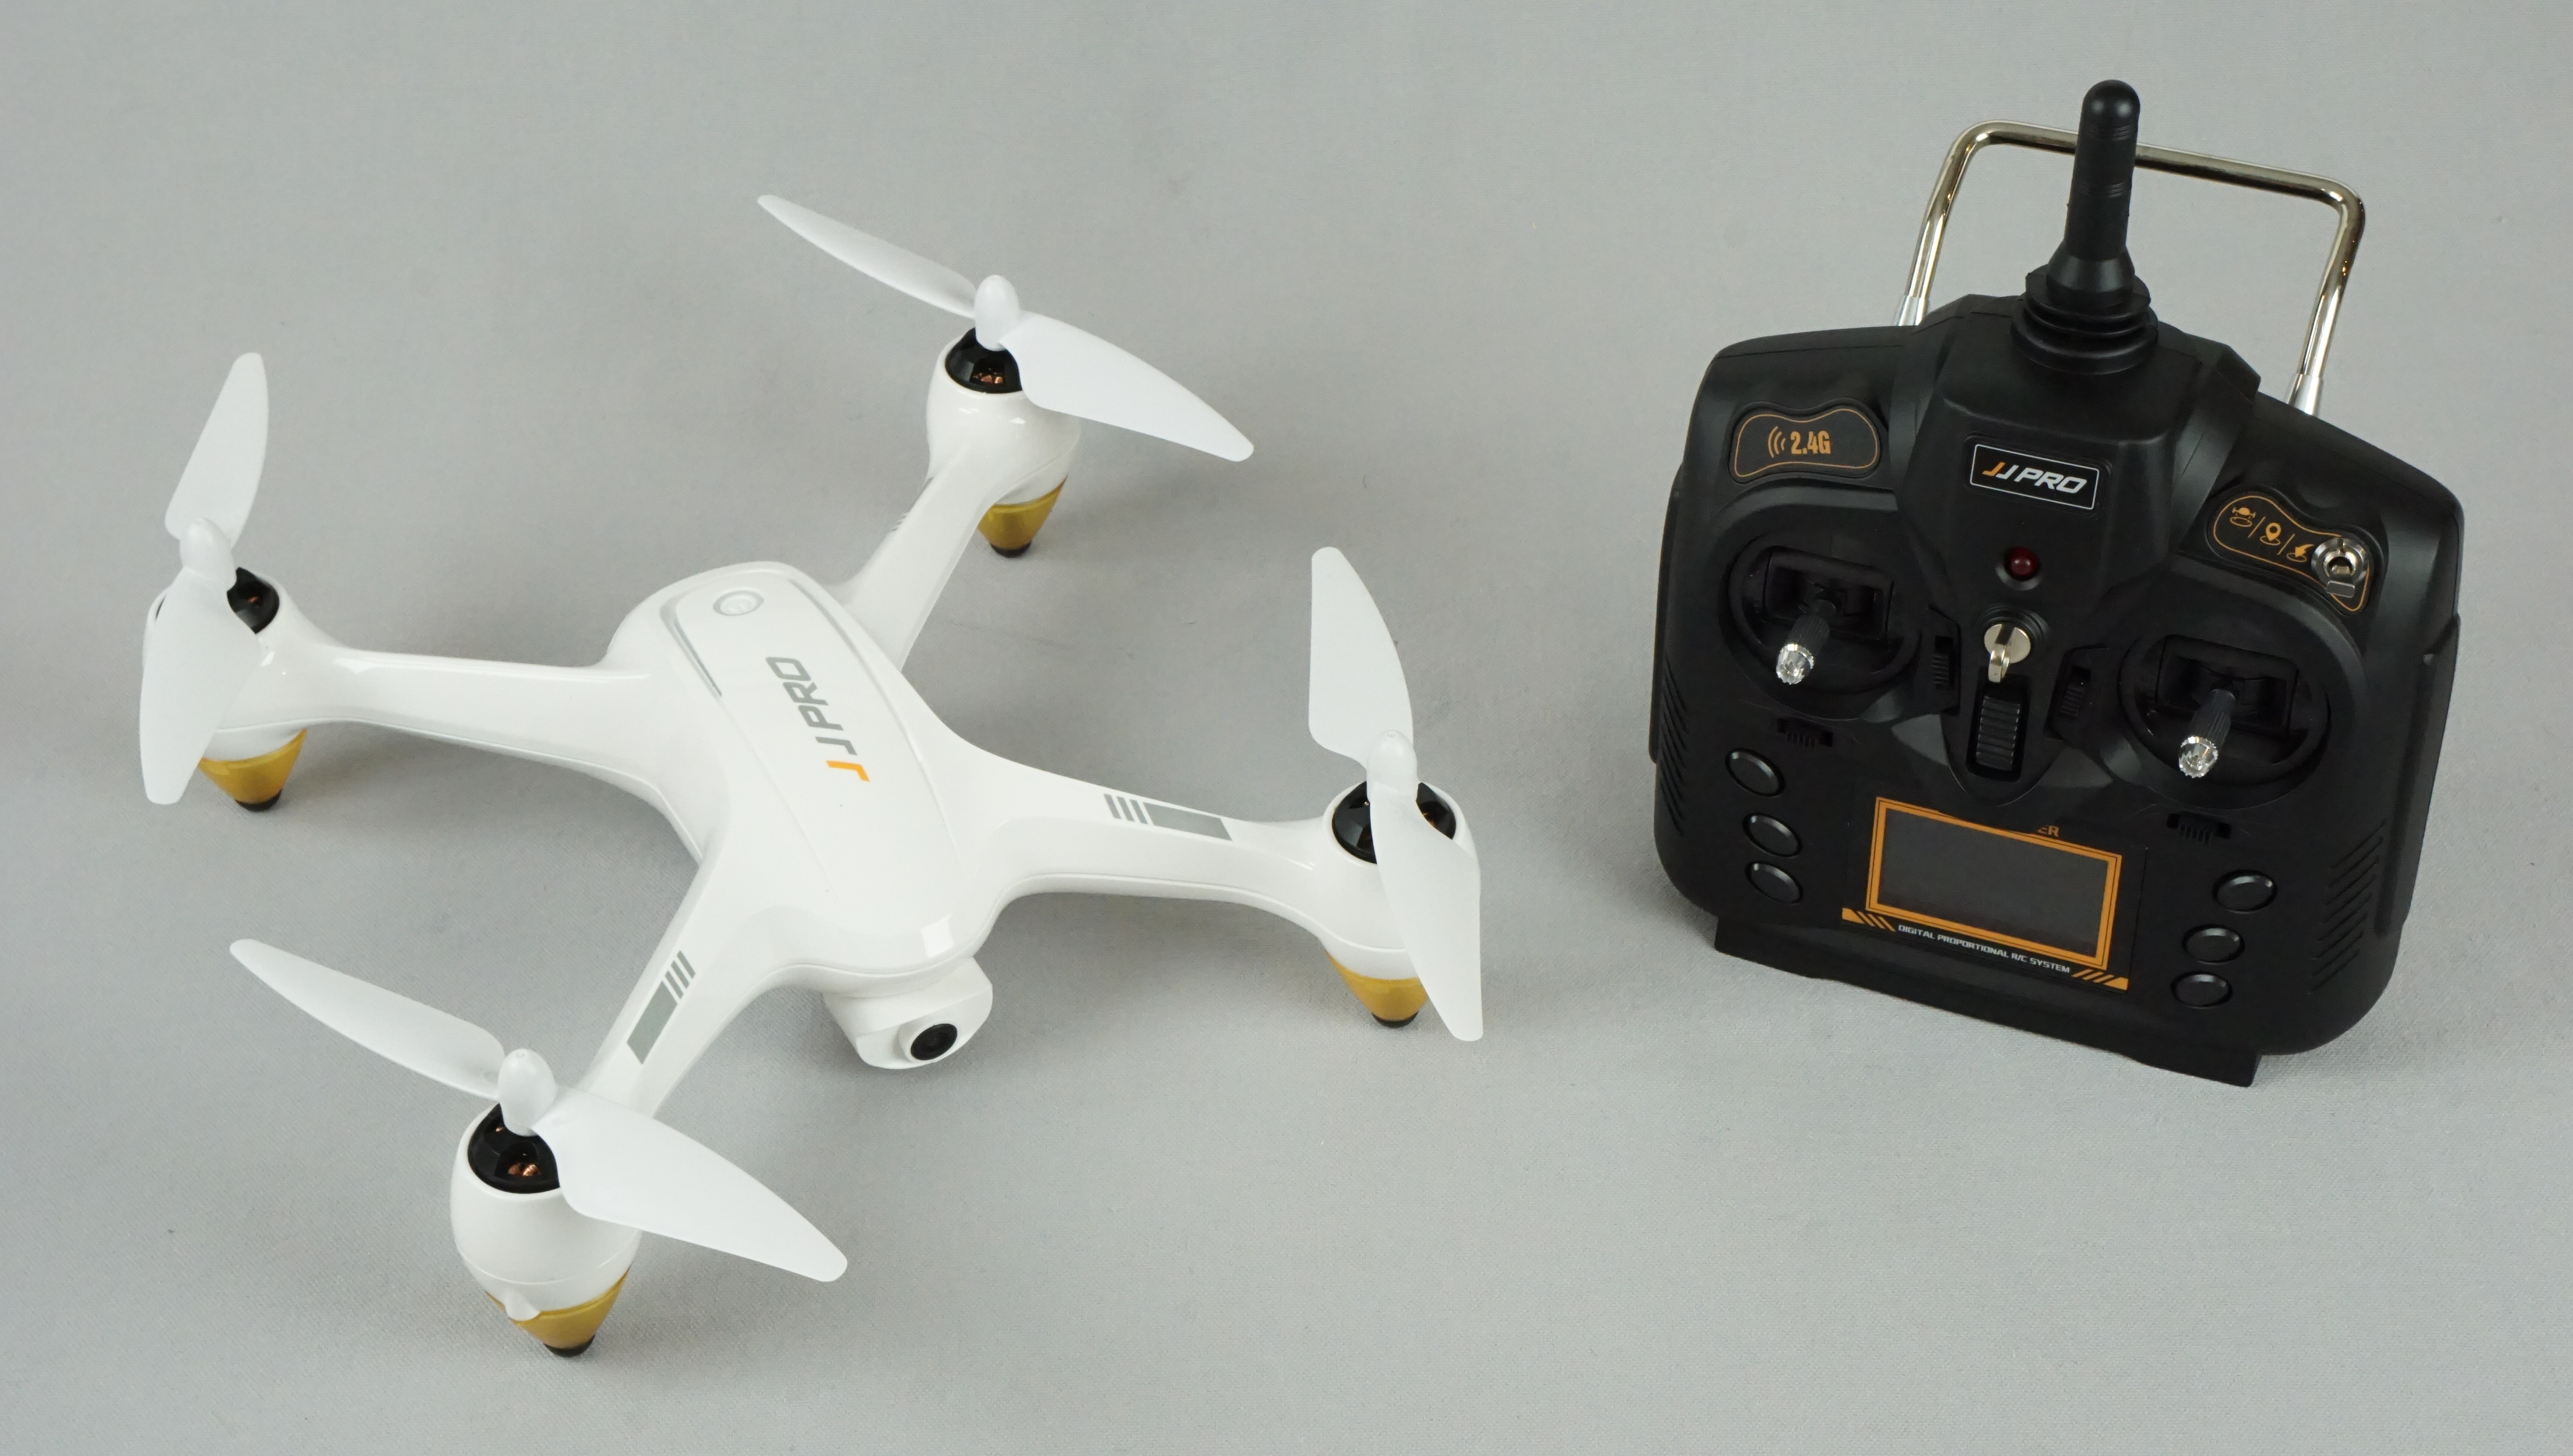 JJPRO Hax the BEST Value GPS Drone You Can